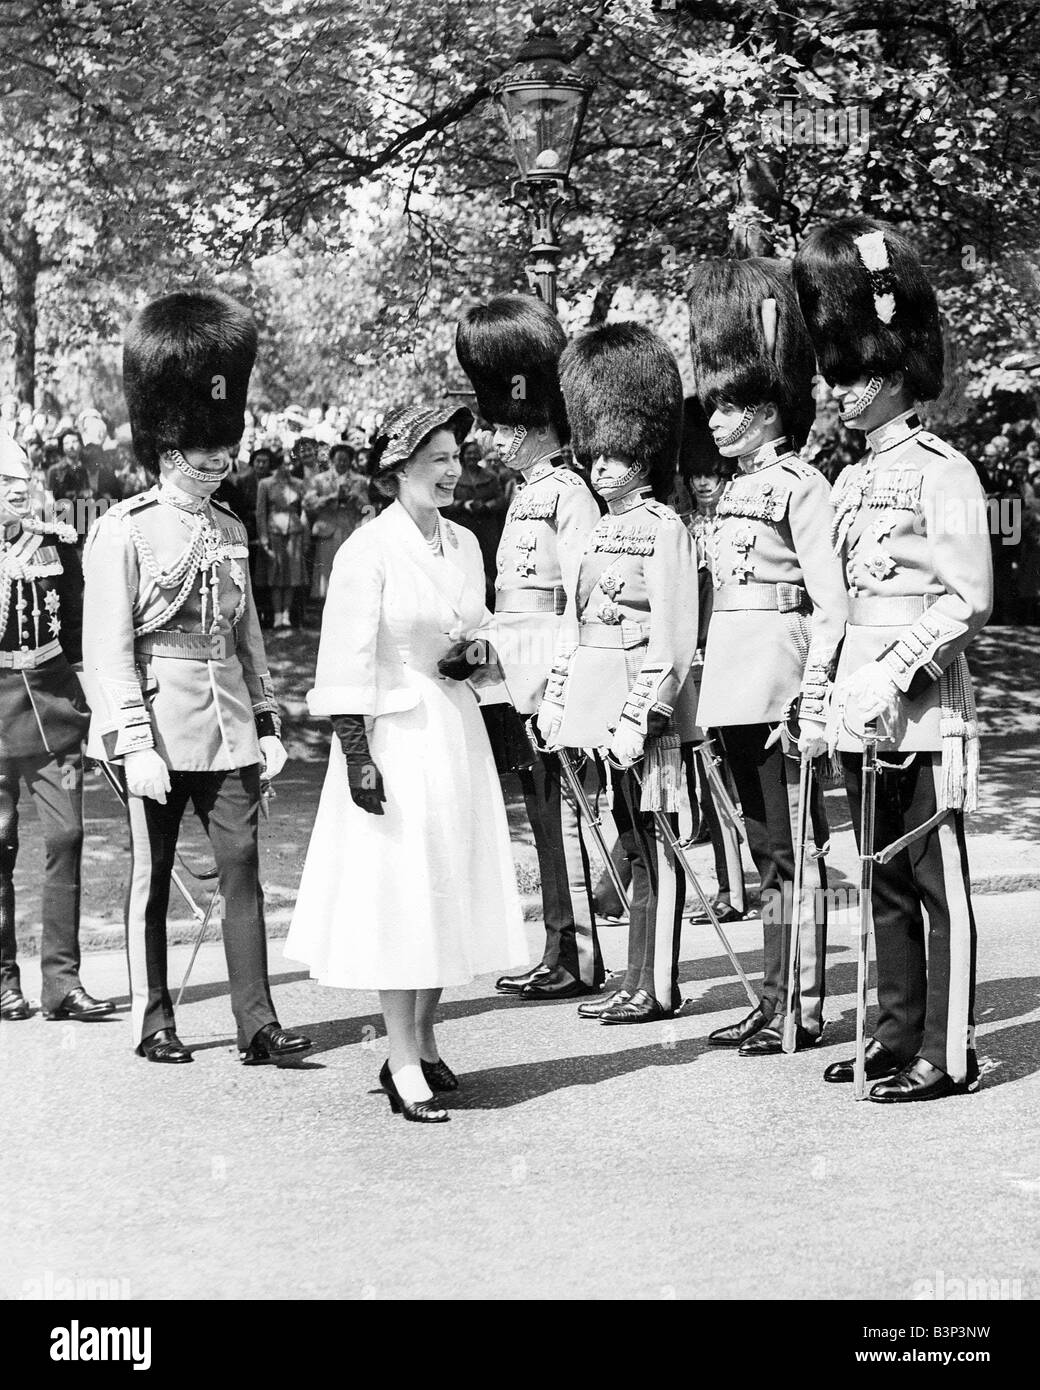 Queen Elizabeth ll Inspecting Guards May 1956 With the Duke of Gloucester the Queen meets the Regimental Colonels of her Household Brigade The Duke of Edinburgh extreme right Colonel of the Welsh Guards also FROM LEFT General Sir Henry Loyd Coldstream Guards Field Marshal Earl Alexander Irish Guards and General Lord Jeffreys Grenadiers The Queen opening the Household Brigade Memprial Clioster in Birdcage Walk The Cloister which is part of the design for the restored Chapel of Wellington Barracks damaged by a fire bombing is in memory of officers and men of the Household Brigade who died in WW2 Stock Photo